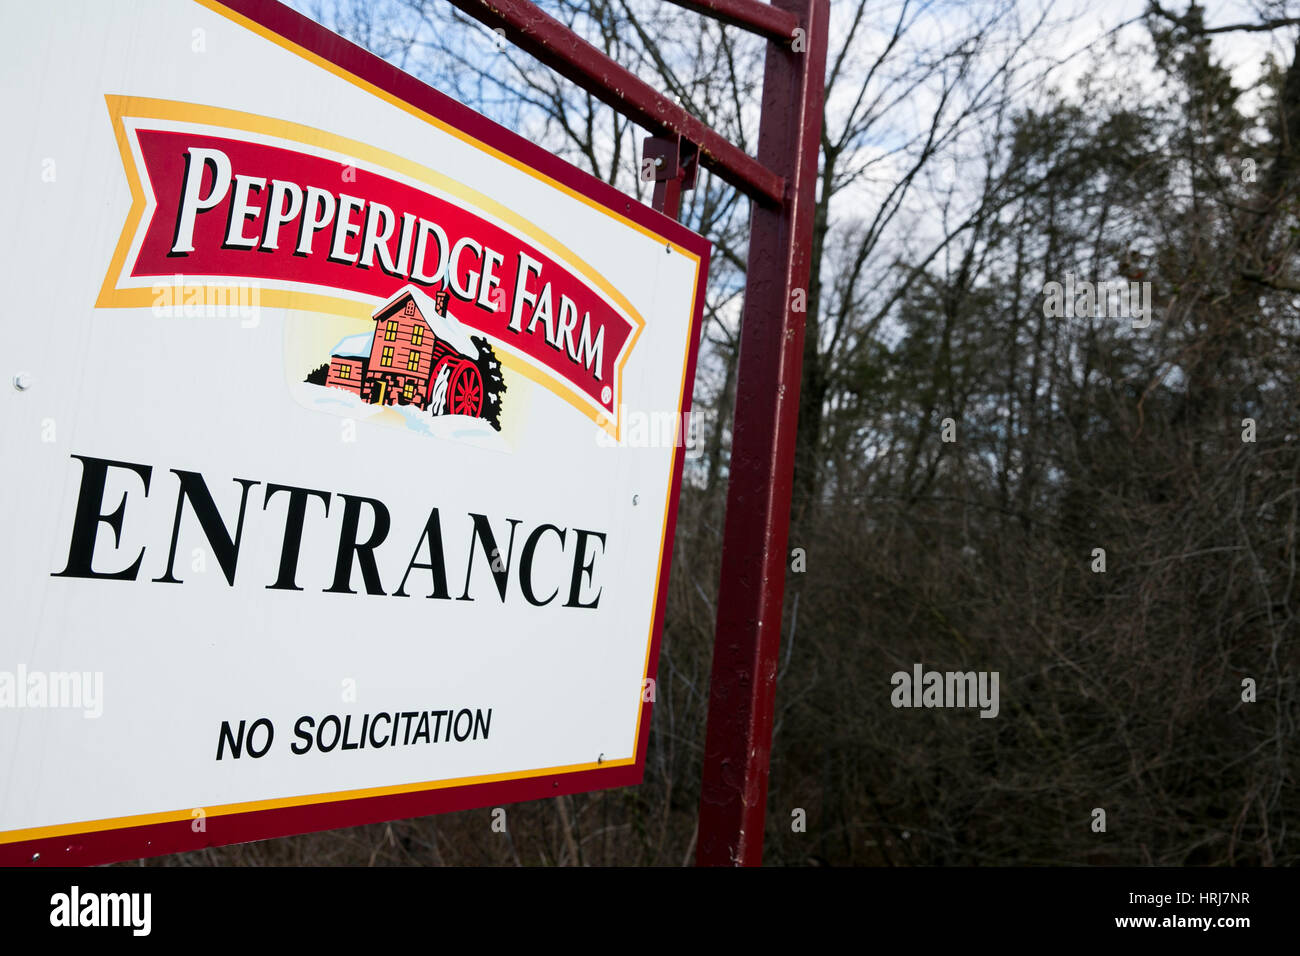 A logo sign outside of a facility occupied by Pepperidge Farm in Denver, Pennsylvania on February 26, 2017. Stock Photo